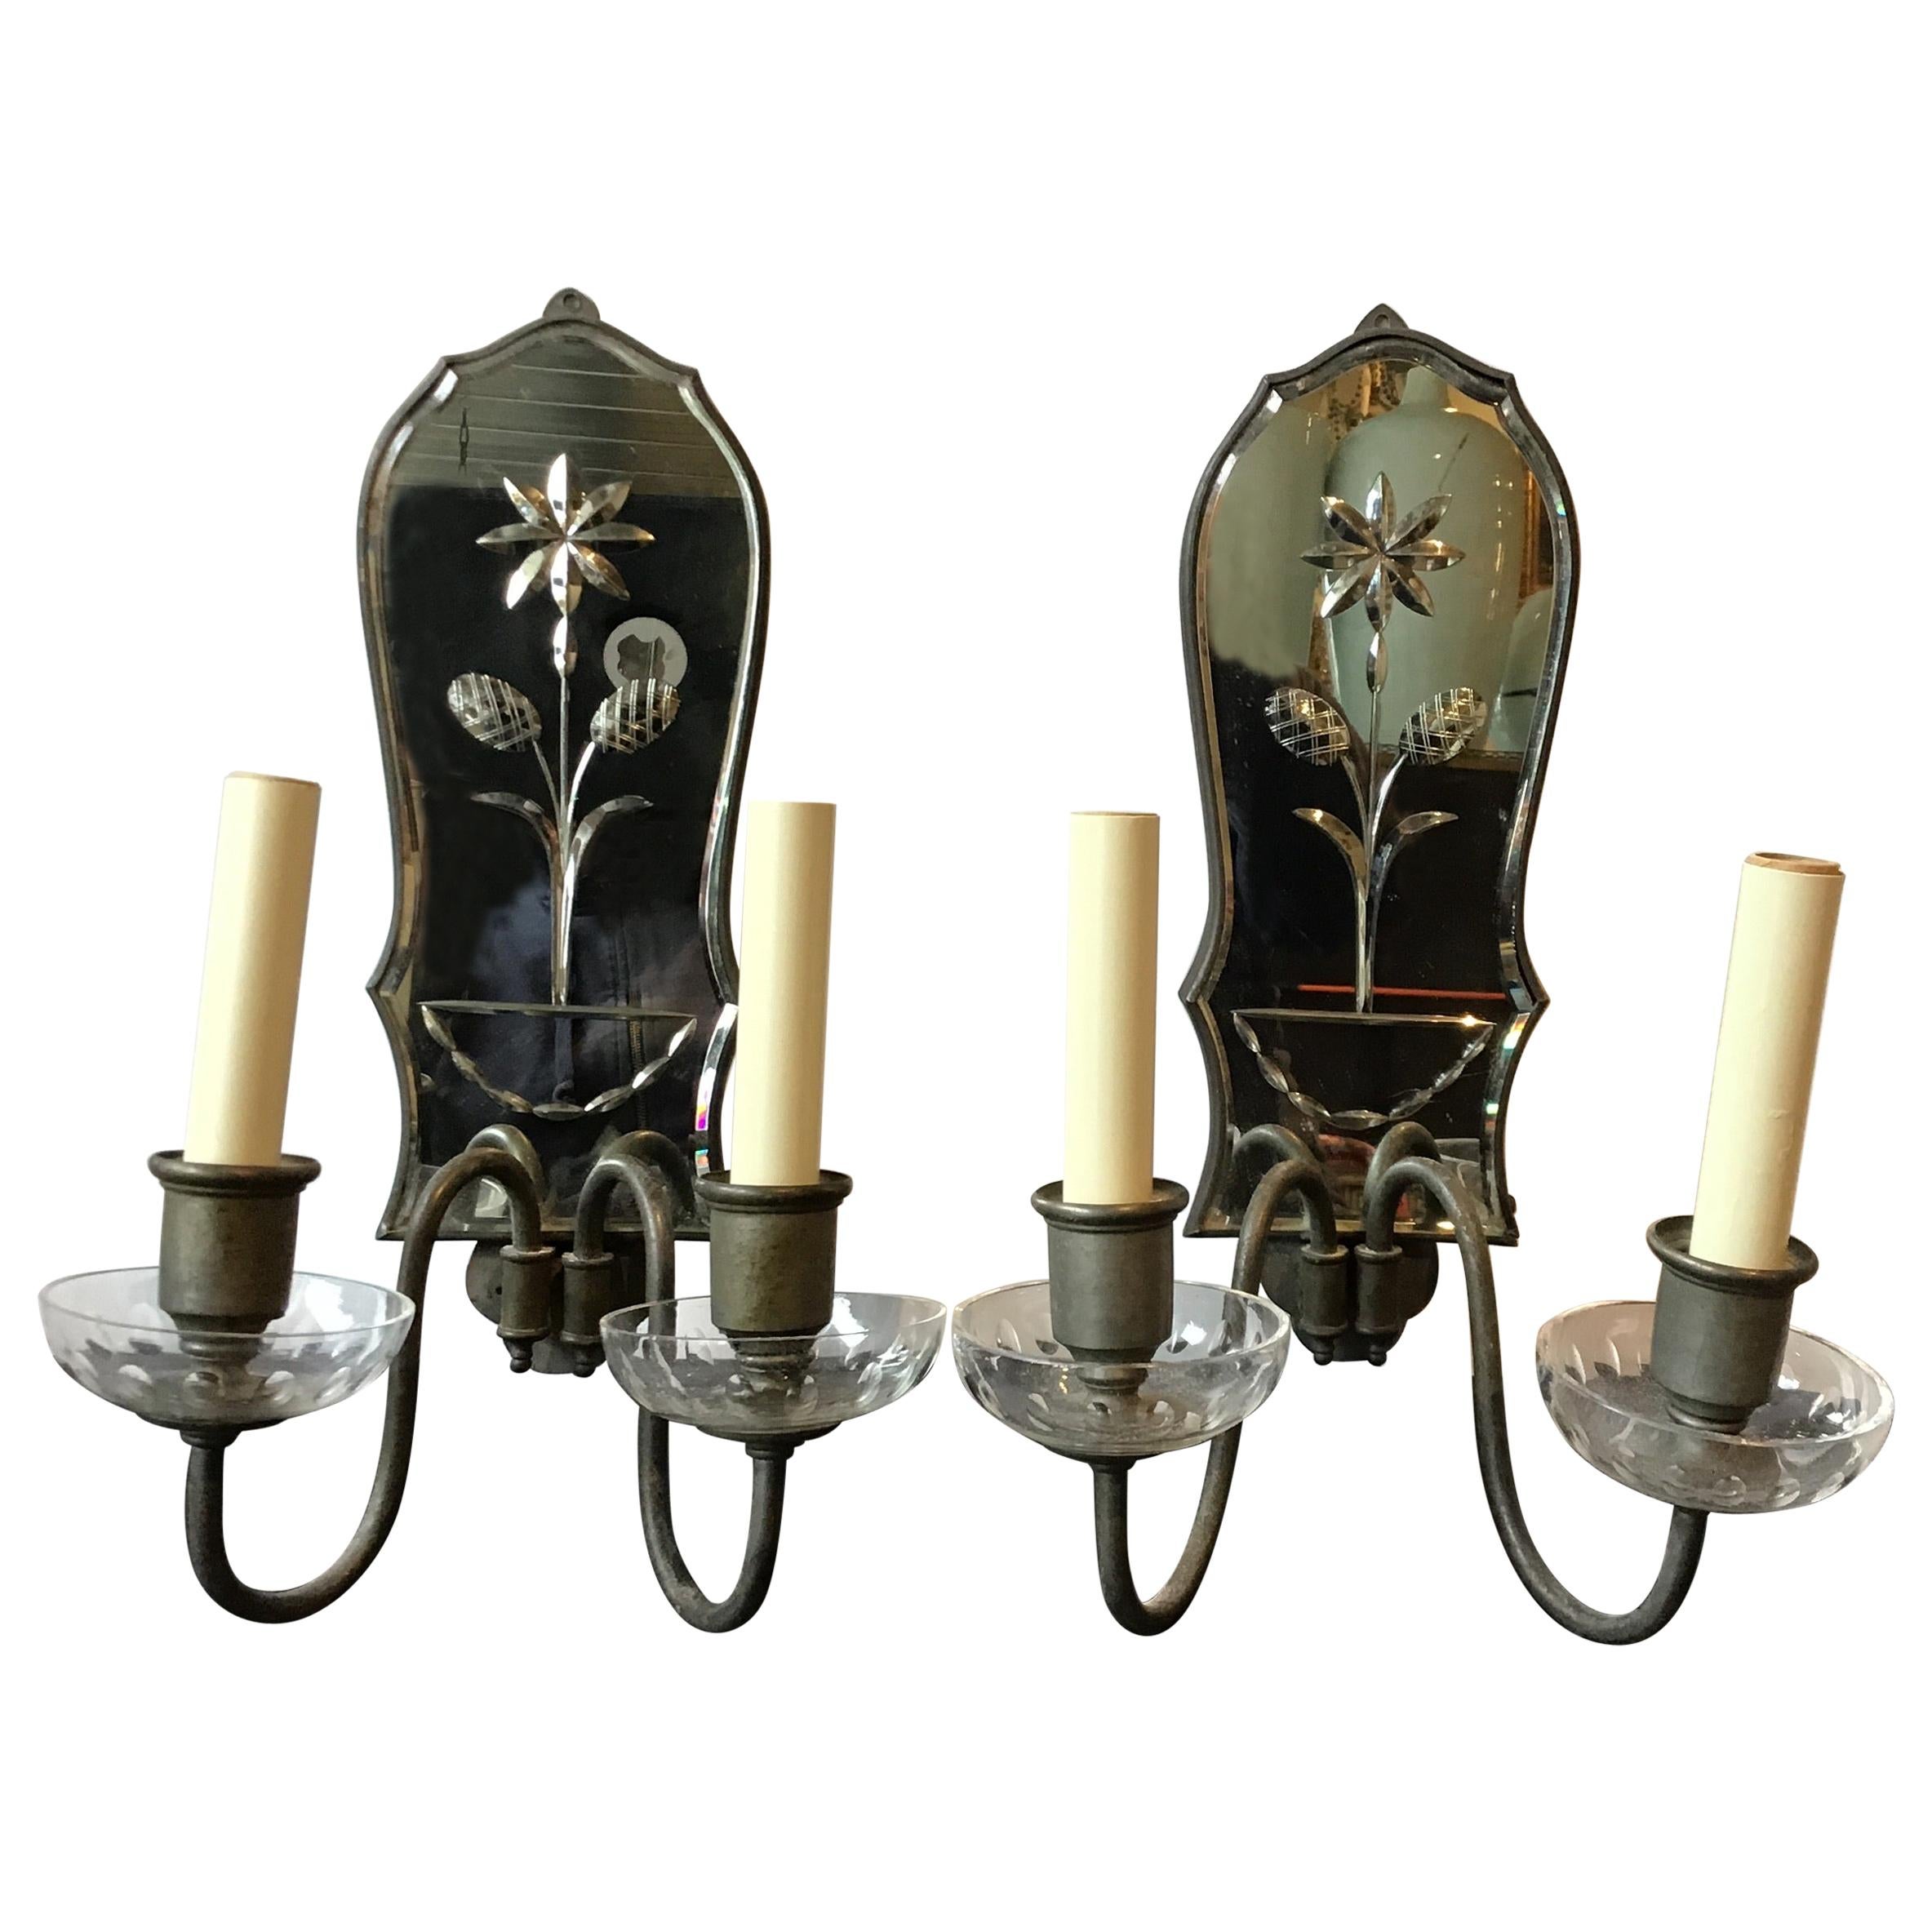 Pair of 1920s Mirrored Sconces Flower in Urn